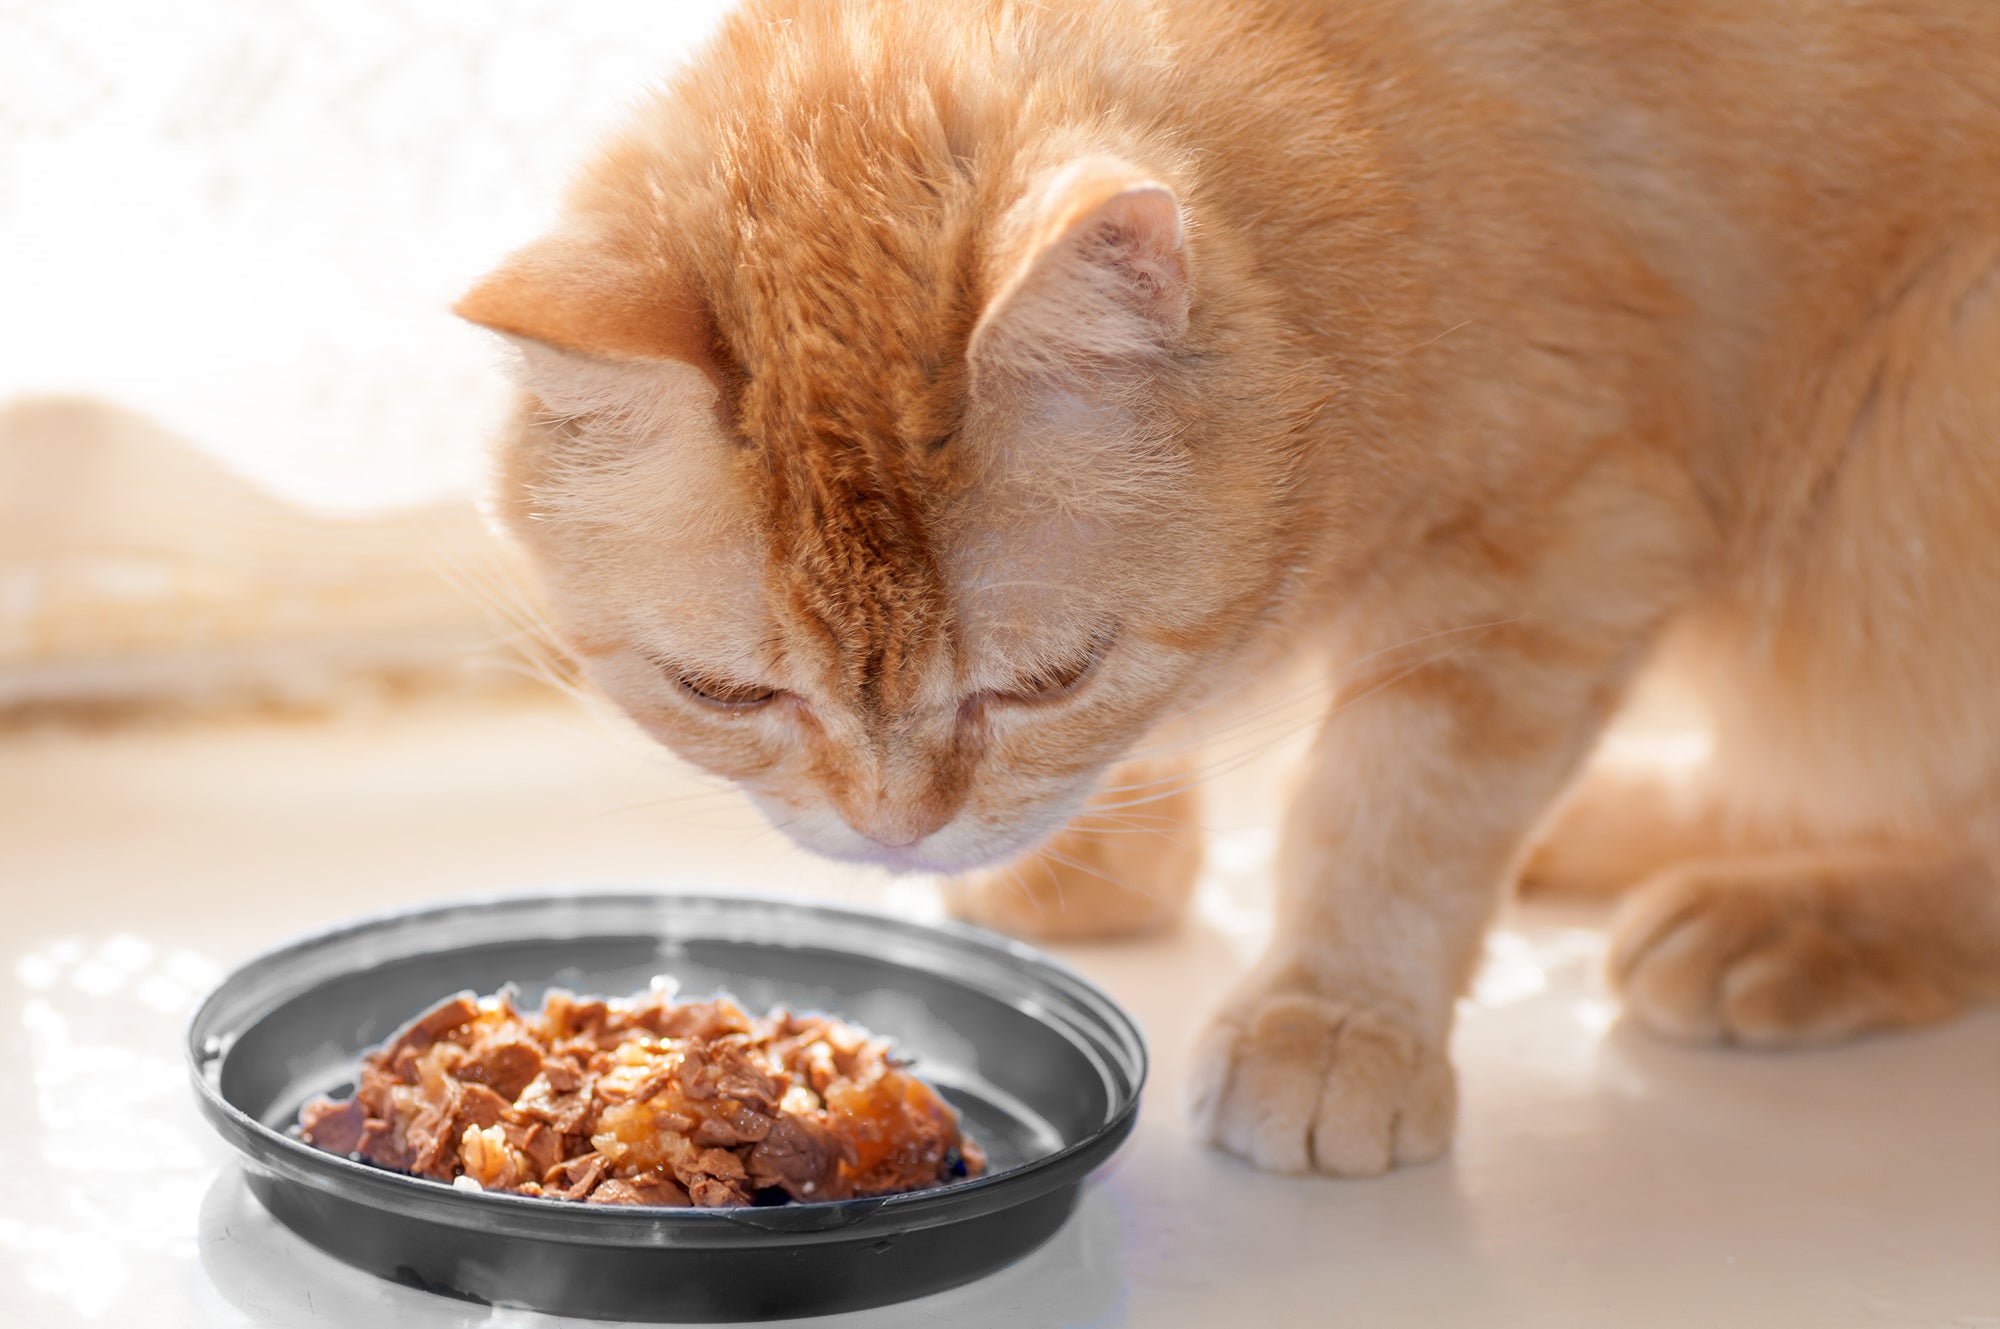 How much wet food to feed a cat per day